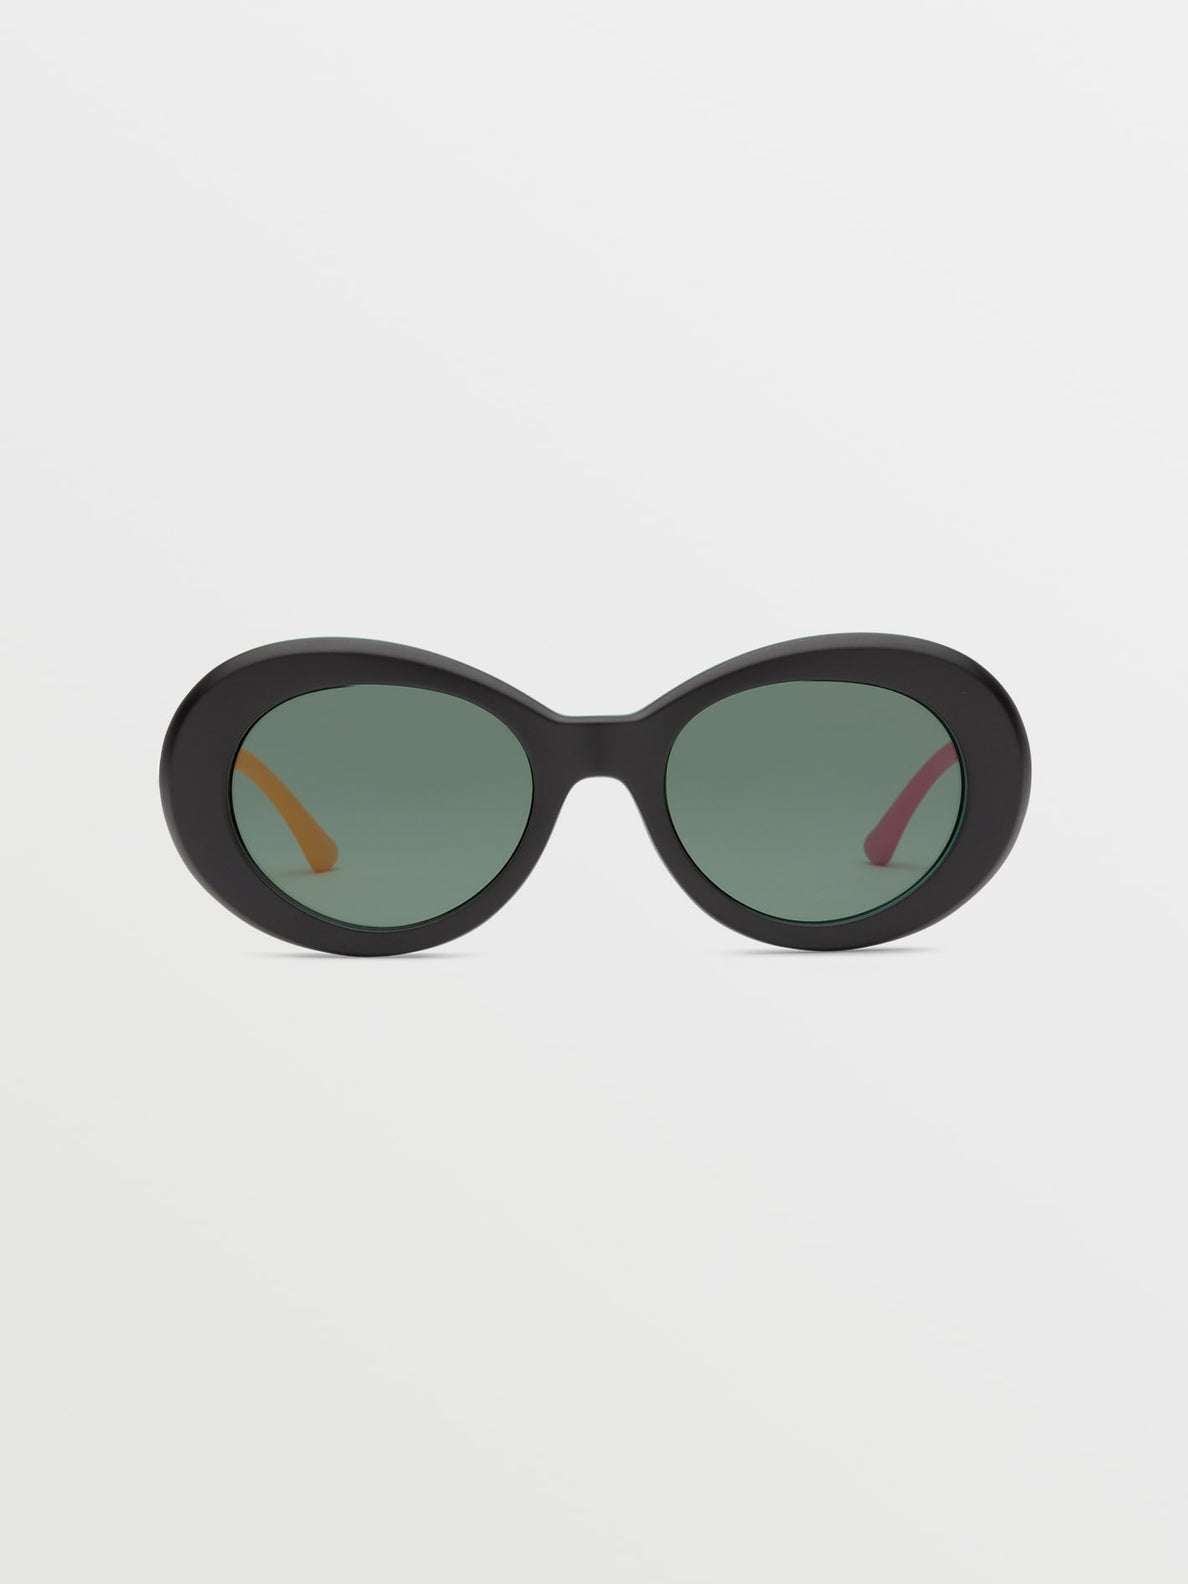 Stoned Sunglasses - Volcom Ent/Teal (VE03205531_VCO) [F]